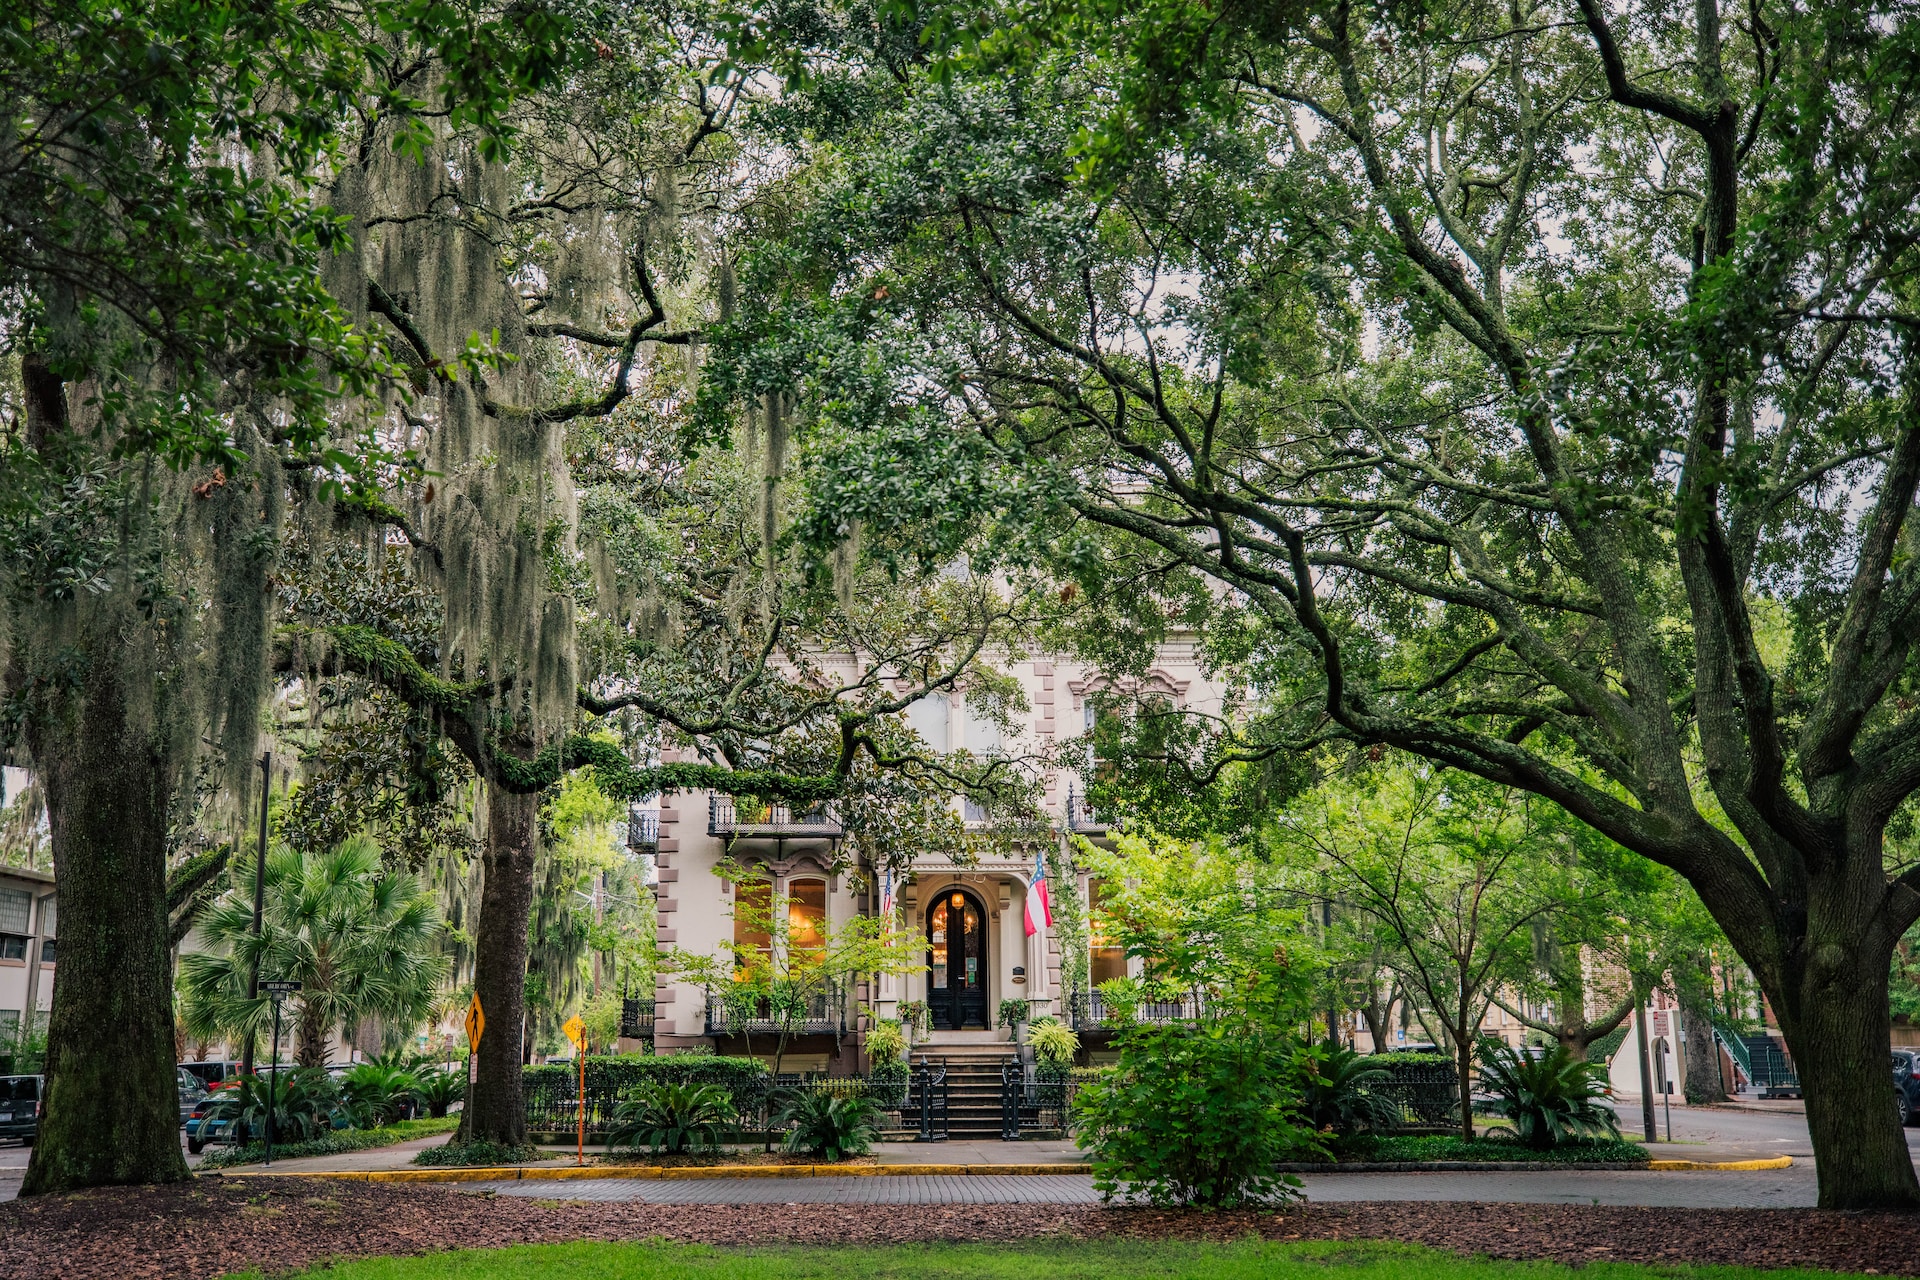 Savannah Is Known For Its Spanish Moss Trees